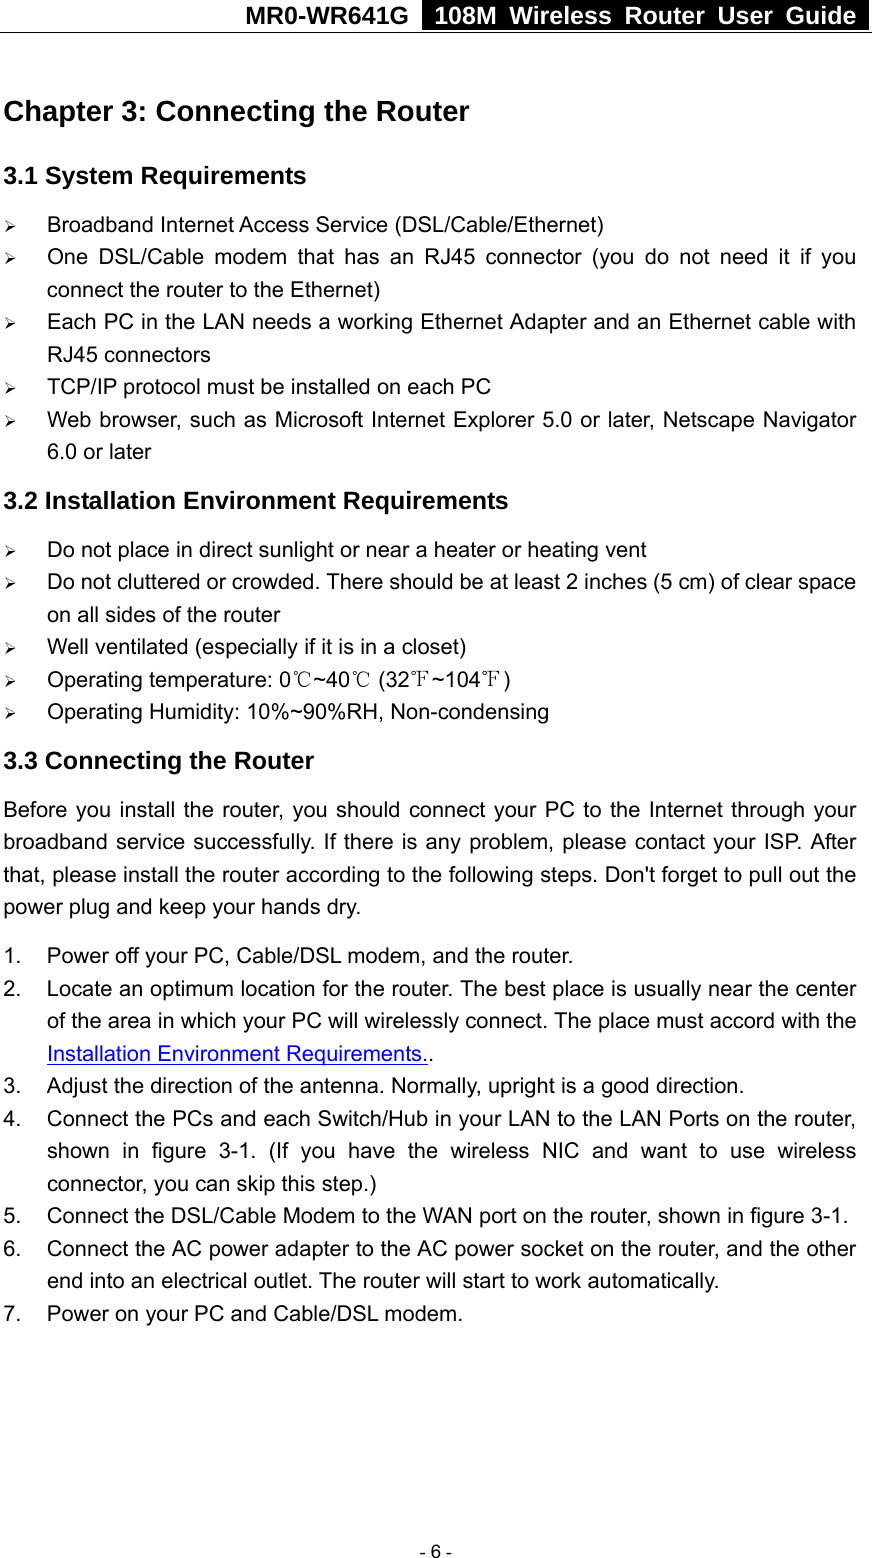 MR0-WR641G   108M Wireless Router User Guide  Chapter 3: Connecting the Router 3.1 System Requirements ¾ Broadband Internet Access Service (DSL/Cable/Ethernet) ¾ One DSL/Cable modem that has an RJ45 connector (you do not need it if you connect the router to the Ethernet) ¾ Each PC in the LAN needs a working Ethernet Adapter and an Ethernet cable with RJ45 connectors ¾ TCP/IP protocol must be installed on each PC ¾ Web browser, such as Microsoft Internet Explorer 5.0 or later, Netscape Navigator 6.0 or later 3.2 Installation Environment Requirements ¾ Do not place in direct sunlight or near a heater or heating vent ¾ Do not cluttered or crowded. There should be at least 2 inches (5 cm) of clear space on all sides of the router ¾ Well ventilated (especially if it is in a closet) ¾ Operating temperature: 0 ~40  (32 ~104 )℃℃℉ ℉ ¾ Operating Humidity: 10%~90%RH, Non-condensing 3.3 Connecting the Router Before you install the router, you should connect your PC to the Internet through your broadband service successfully. If there is any problem, please contact your ISP. After that, please install the router according to the following steps. Don&apos;t forget to pull out the power plug and keep your hands dry. 1.  Power off your PC, Cable/DSL modem, and the router. 2.  Locate an optimum location for the router. The best place is usually near the center of the area in which your PC will wirelessly connect. The place must accord with the Installation Environment Requirements.. 3.  Adjust the direction of the antenna. Normally, upright is a good direction. 4.  Connect the PCs and each Switch/Hub in your LAN to the LAN Ports on the router, shown in figure 3-1. (If you have the wireless NIC and want to use wireless connector, you can skip this step.) 5. Connect the DSL/Cable Modem to the WAN port on the router, shown in figure 3-1. 6.  Connect the AC power adapter to the AC power socket on the router, and the other end into an electrical outlet. The router will start to work automatically. 7.  Power on your PC and Cable/DSL modem.   - 6 - 